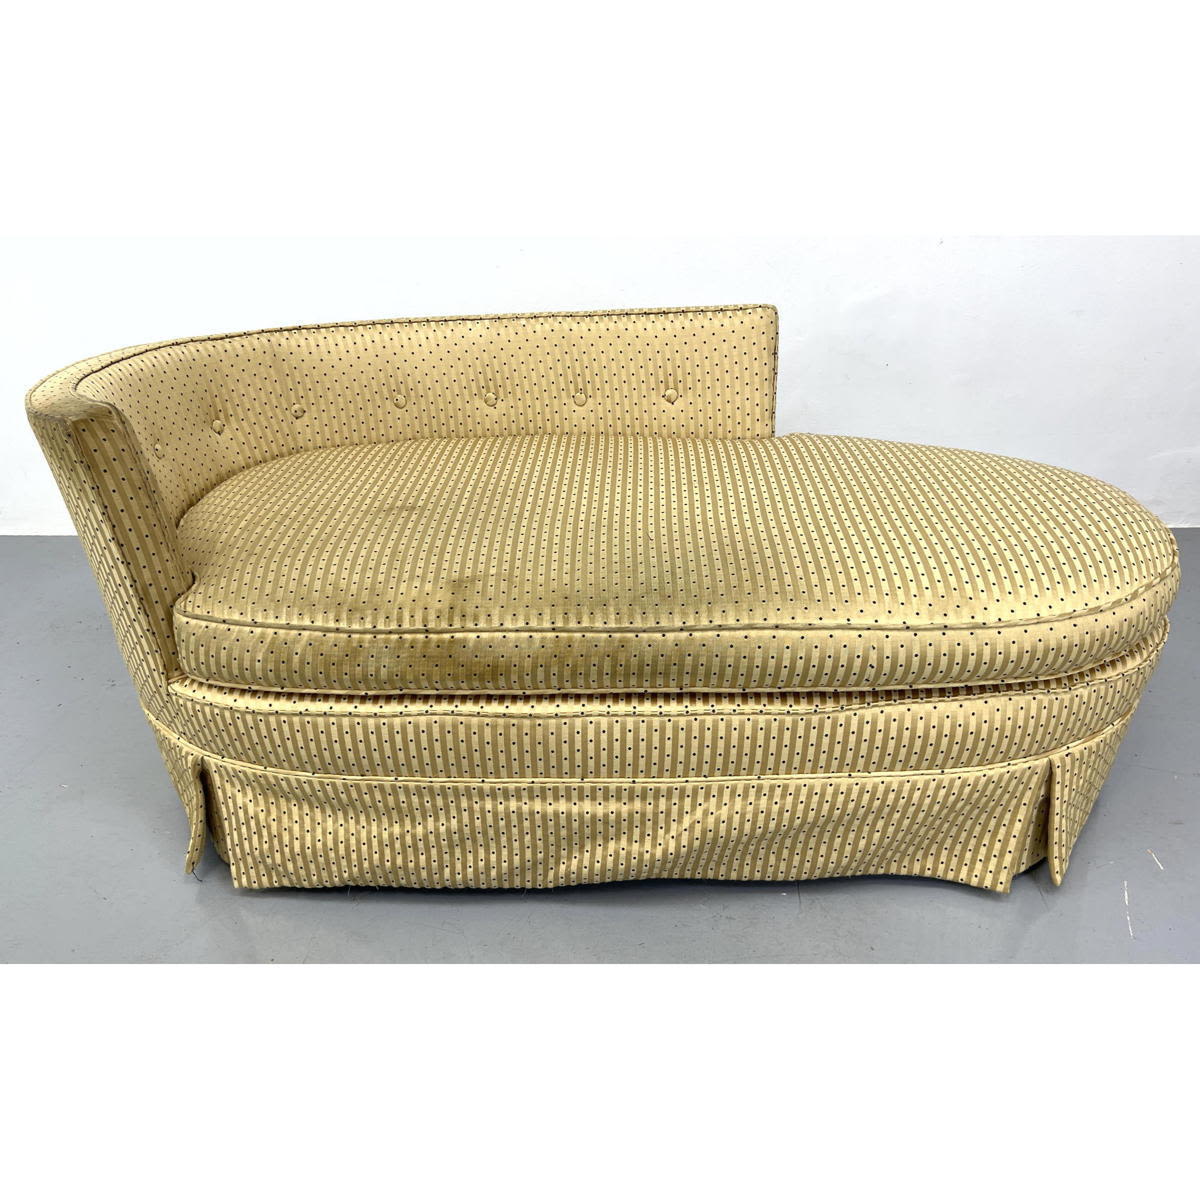 Fully upholstered Fainting couch